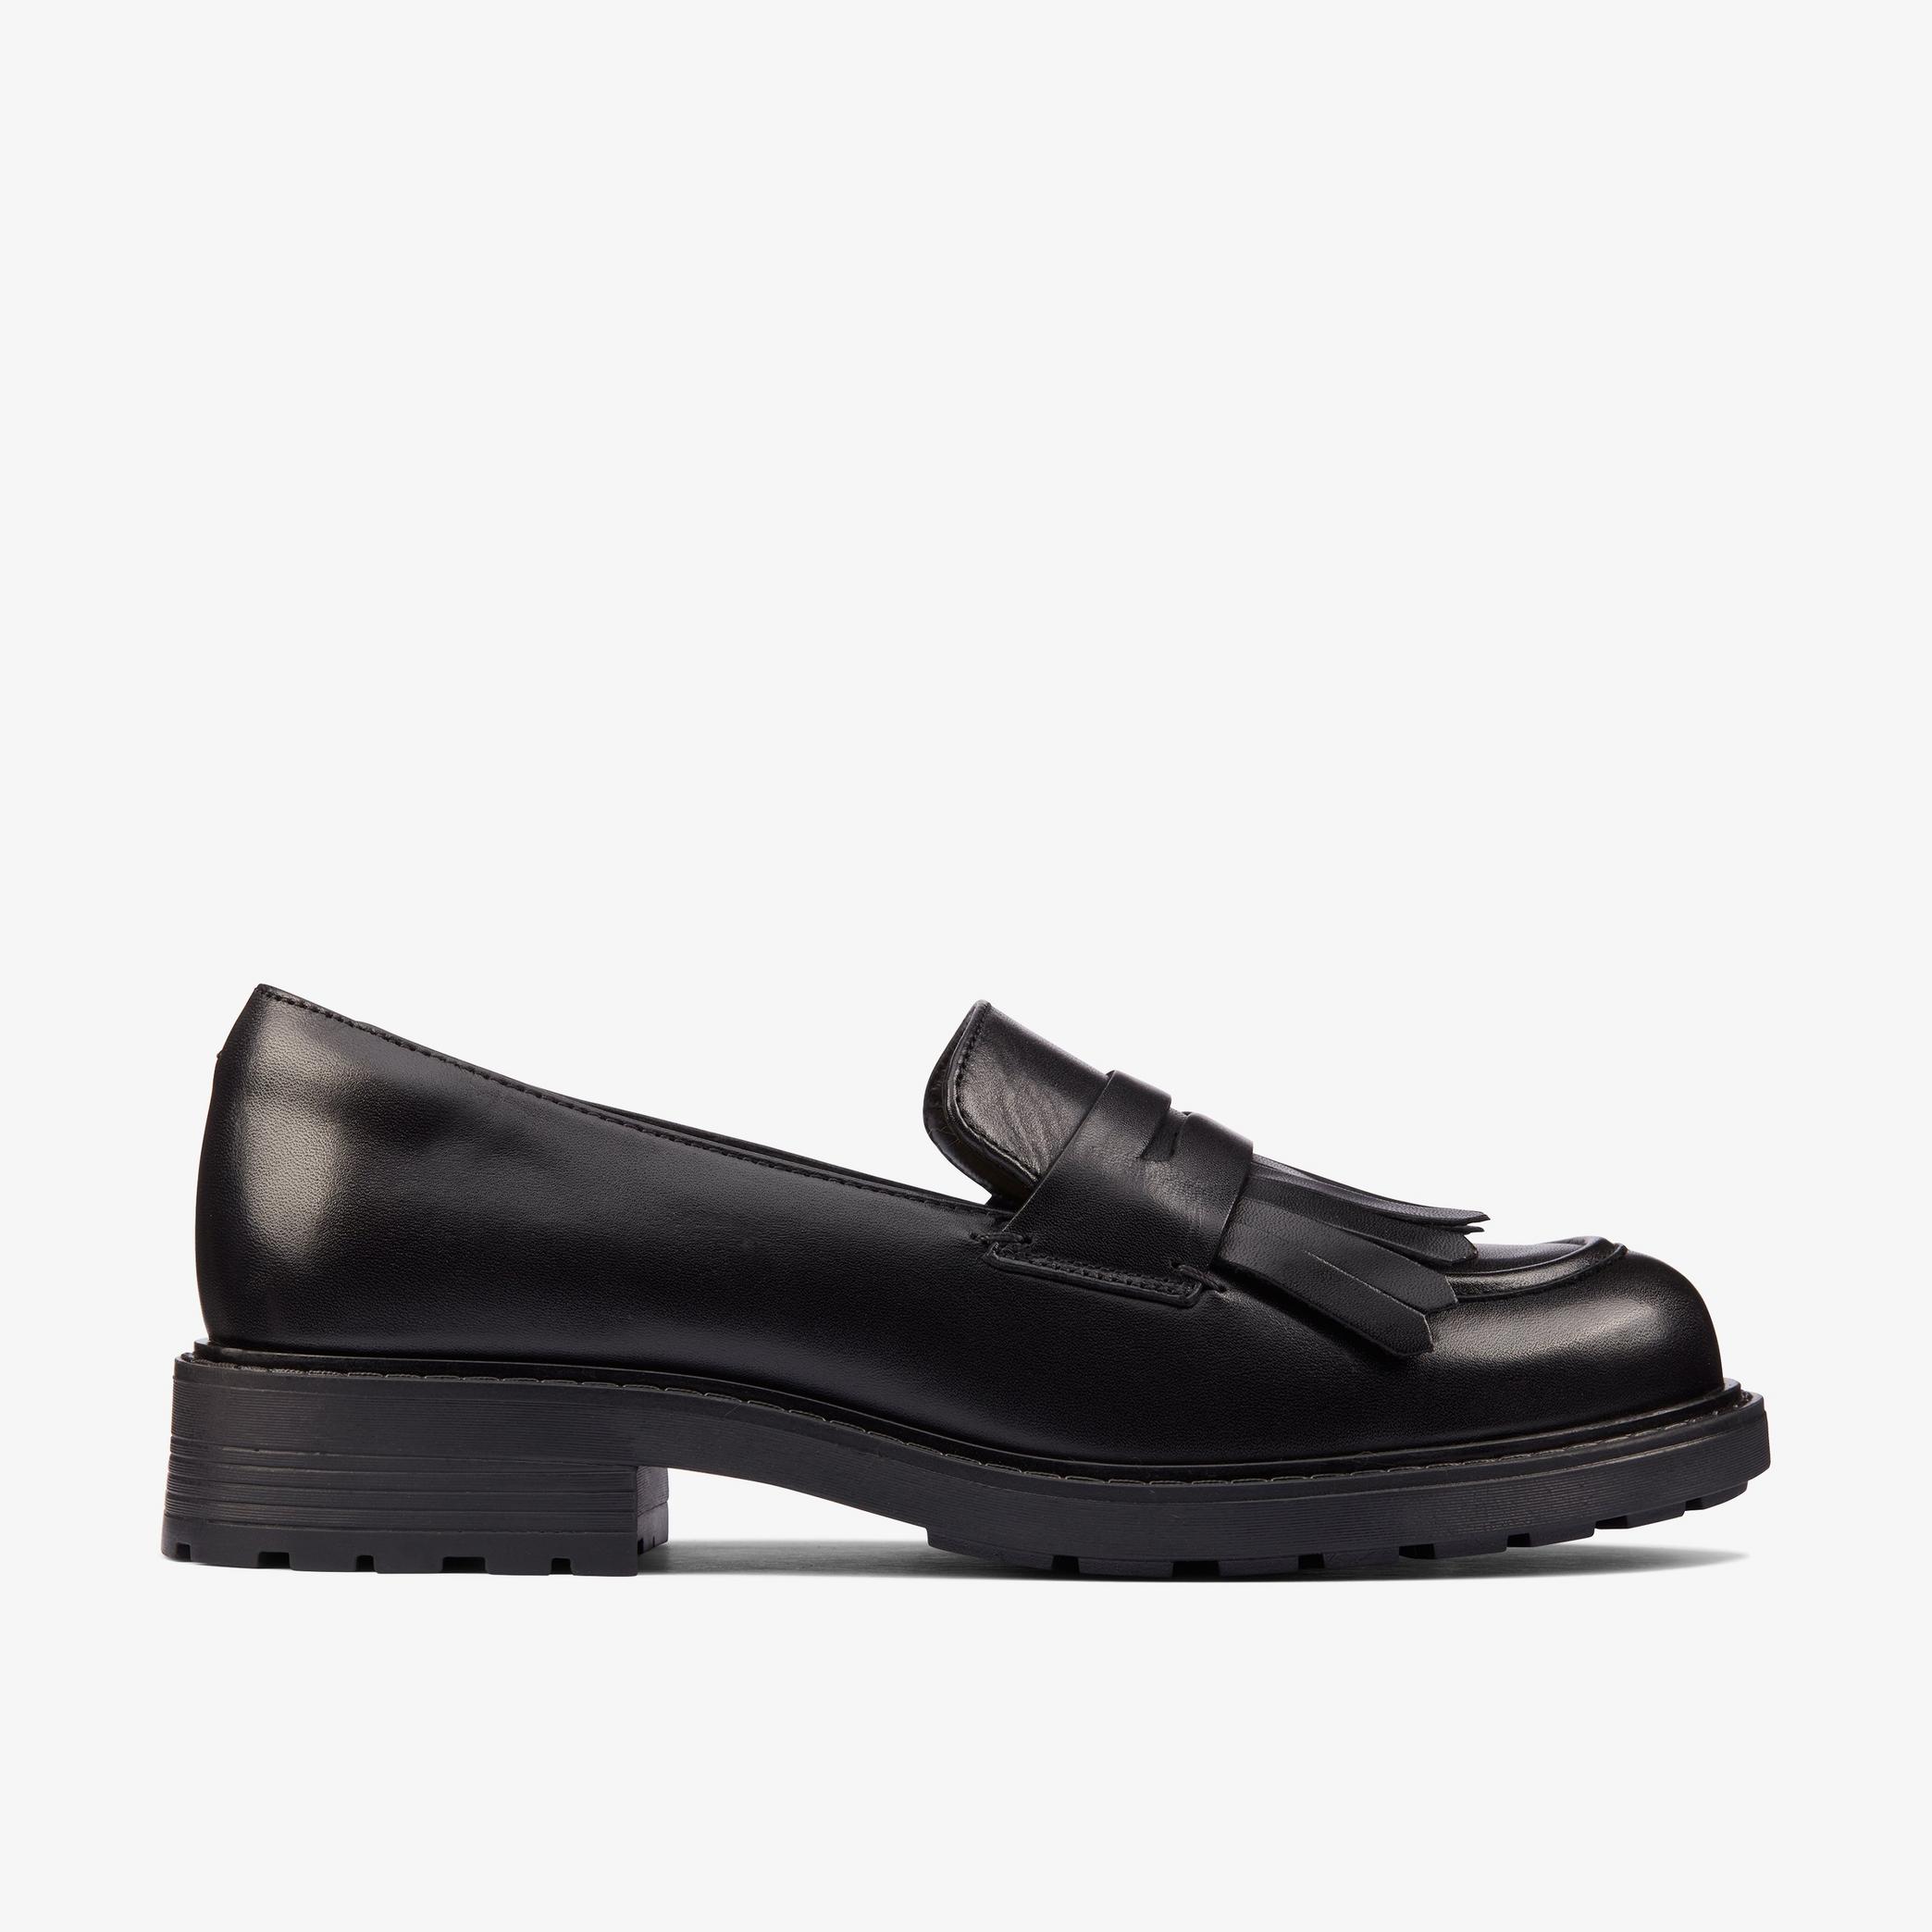 Orinoco 2 Loafer Black Hi Shine Leather Loafers, view 1 of 6